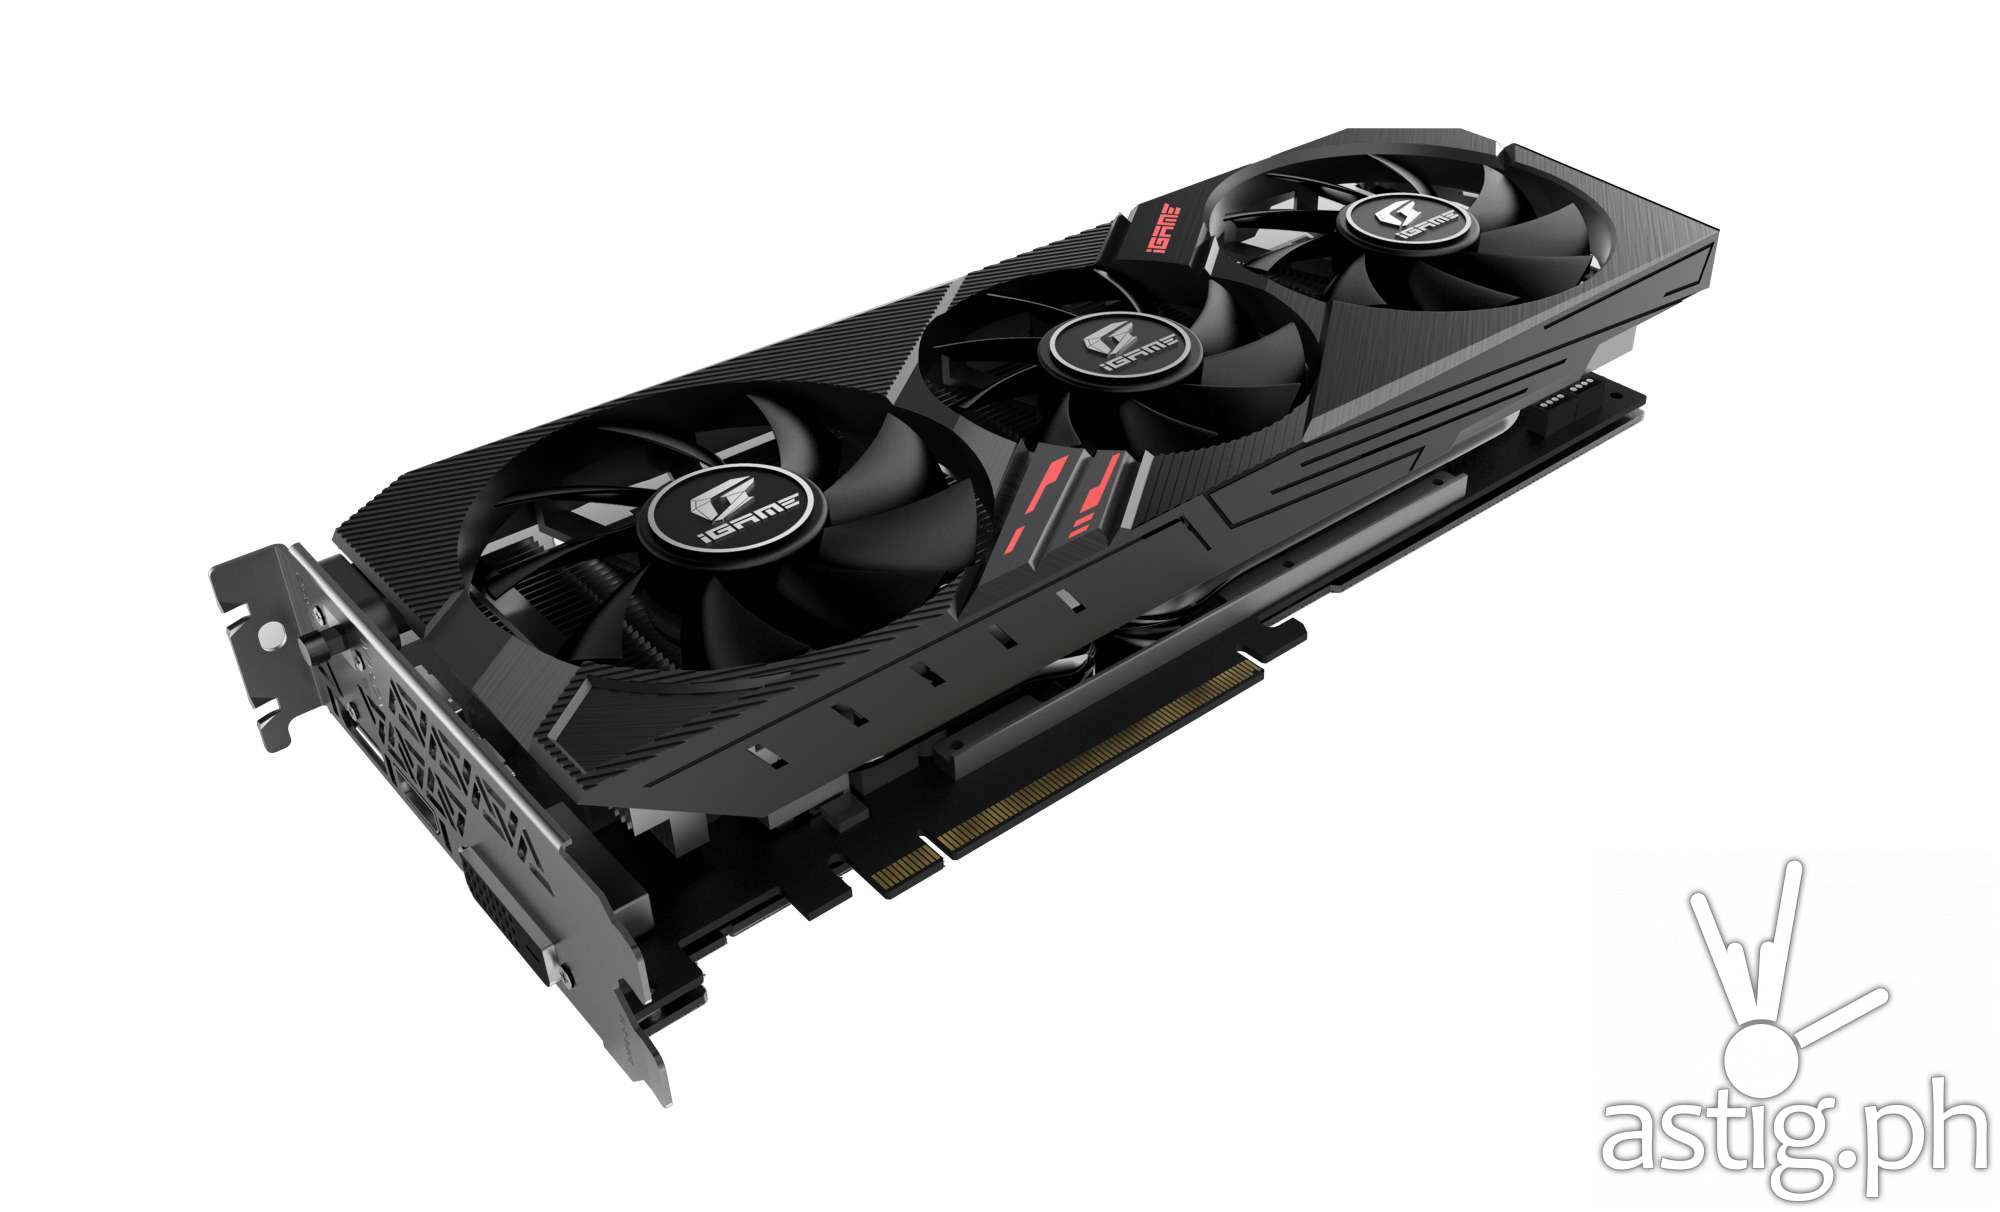 COLORFUL iGame GTX 1660 Ti Ultra goes official | ASTIG.PH